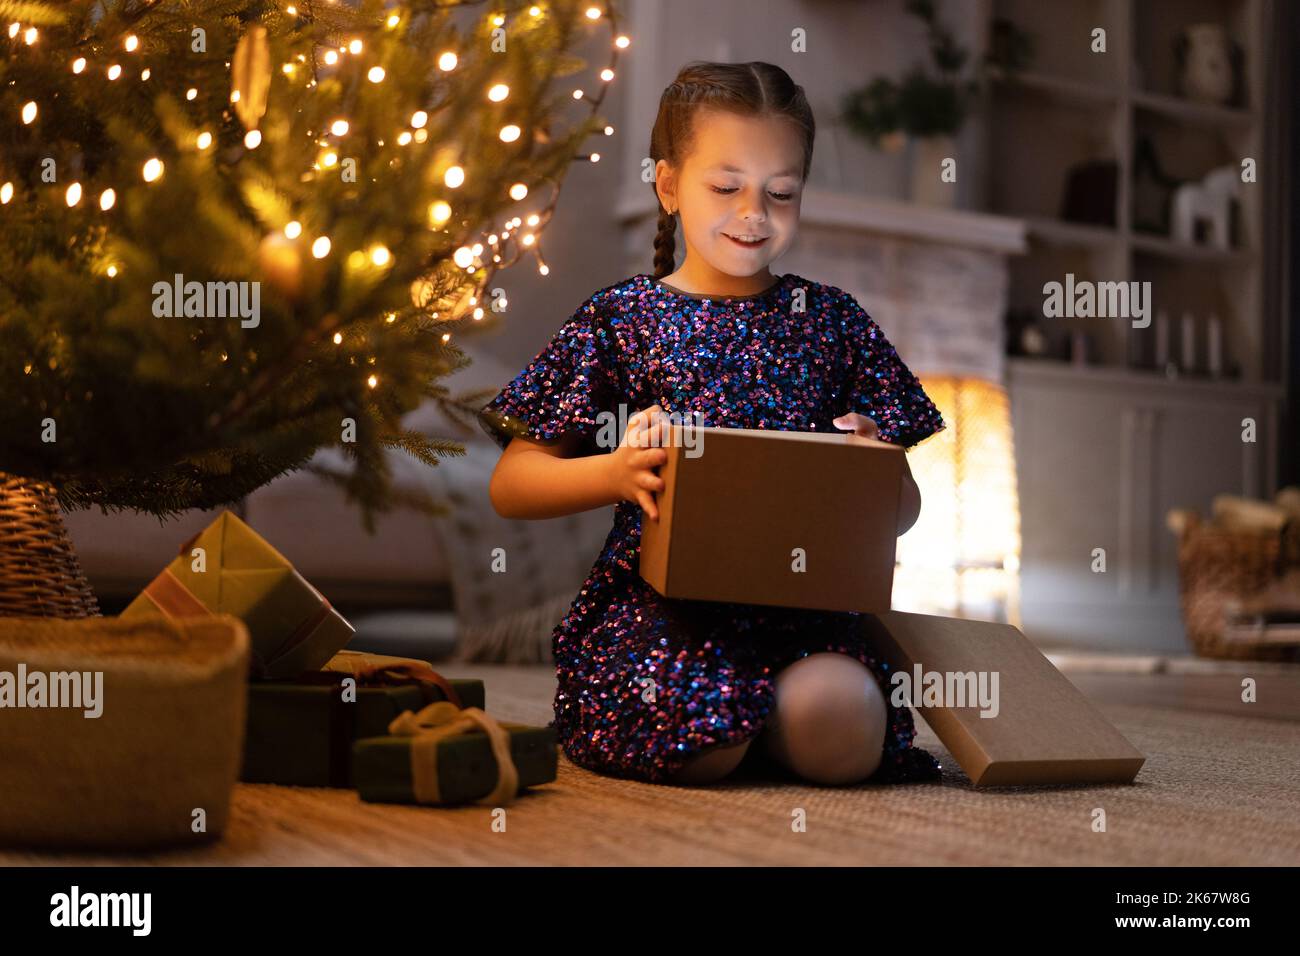 Merry Christmas. happy girl with magic gift at home near Christmas tree and fireplace. Stock Photo